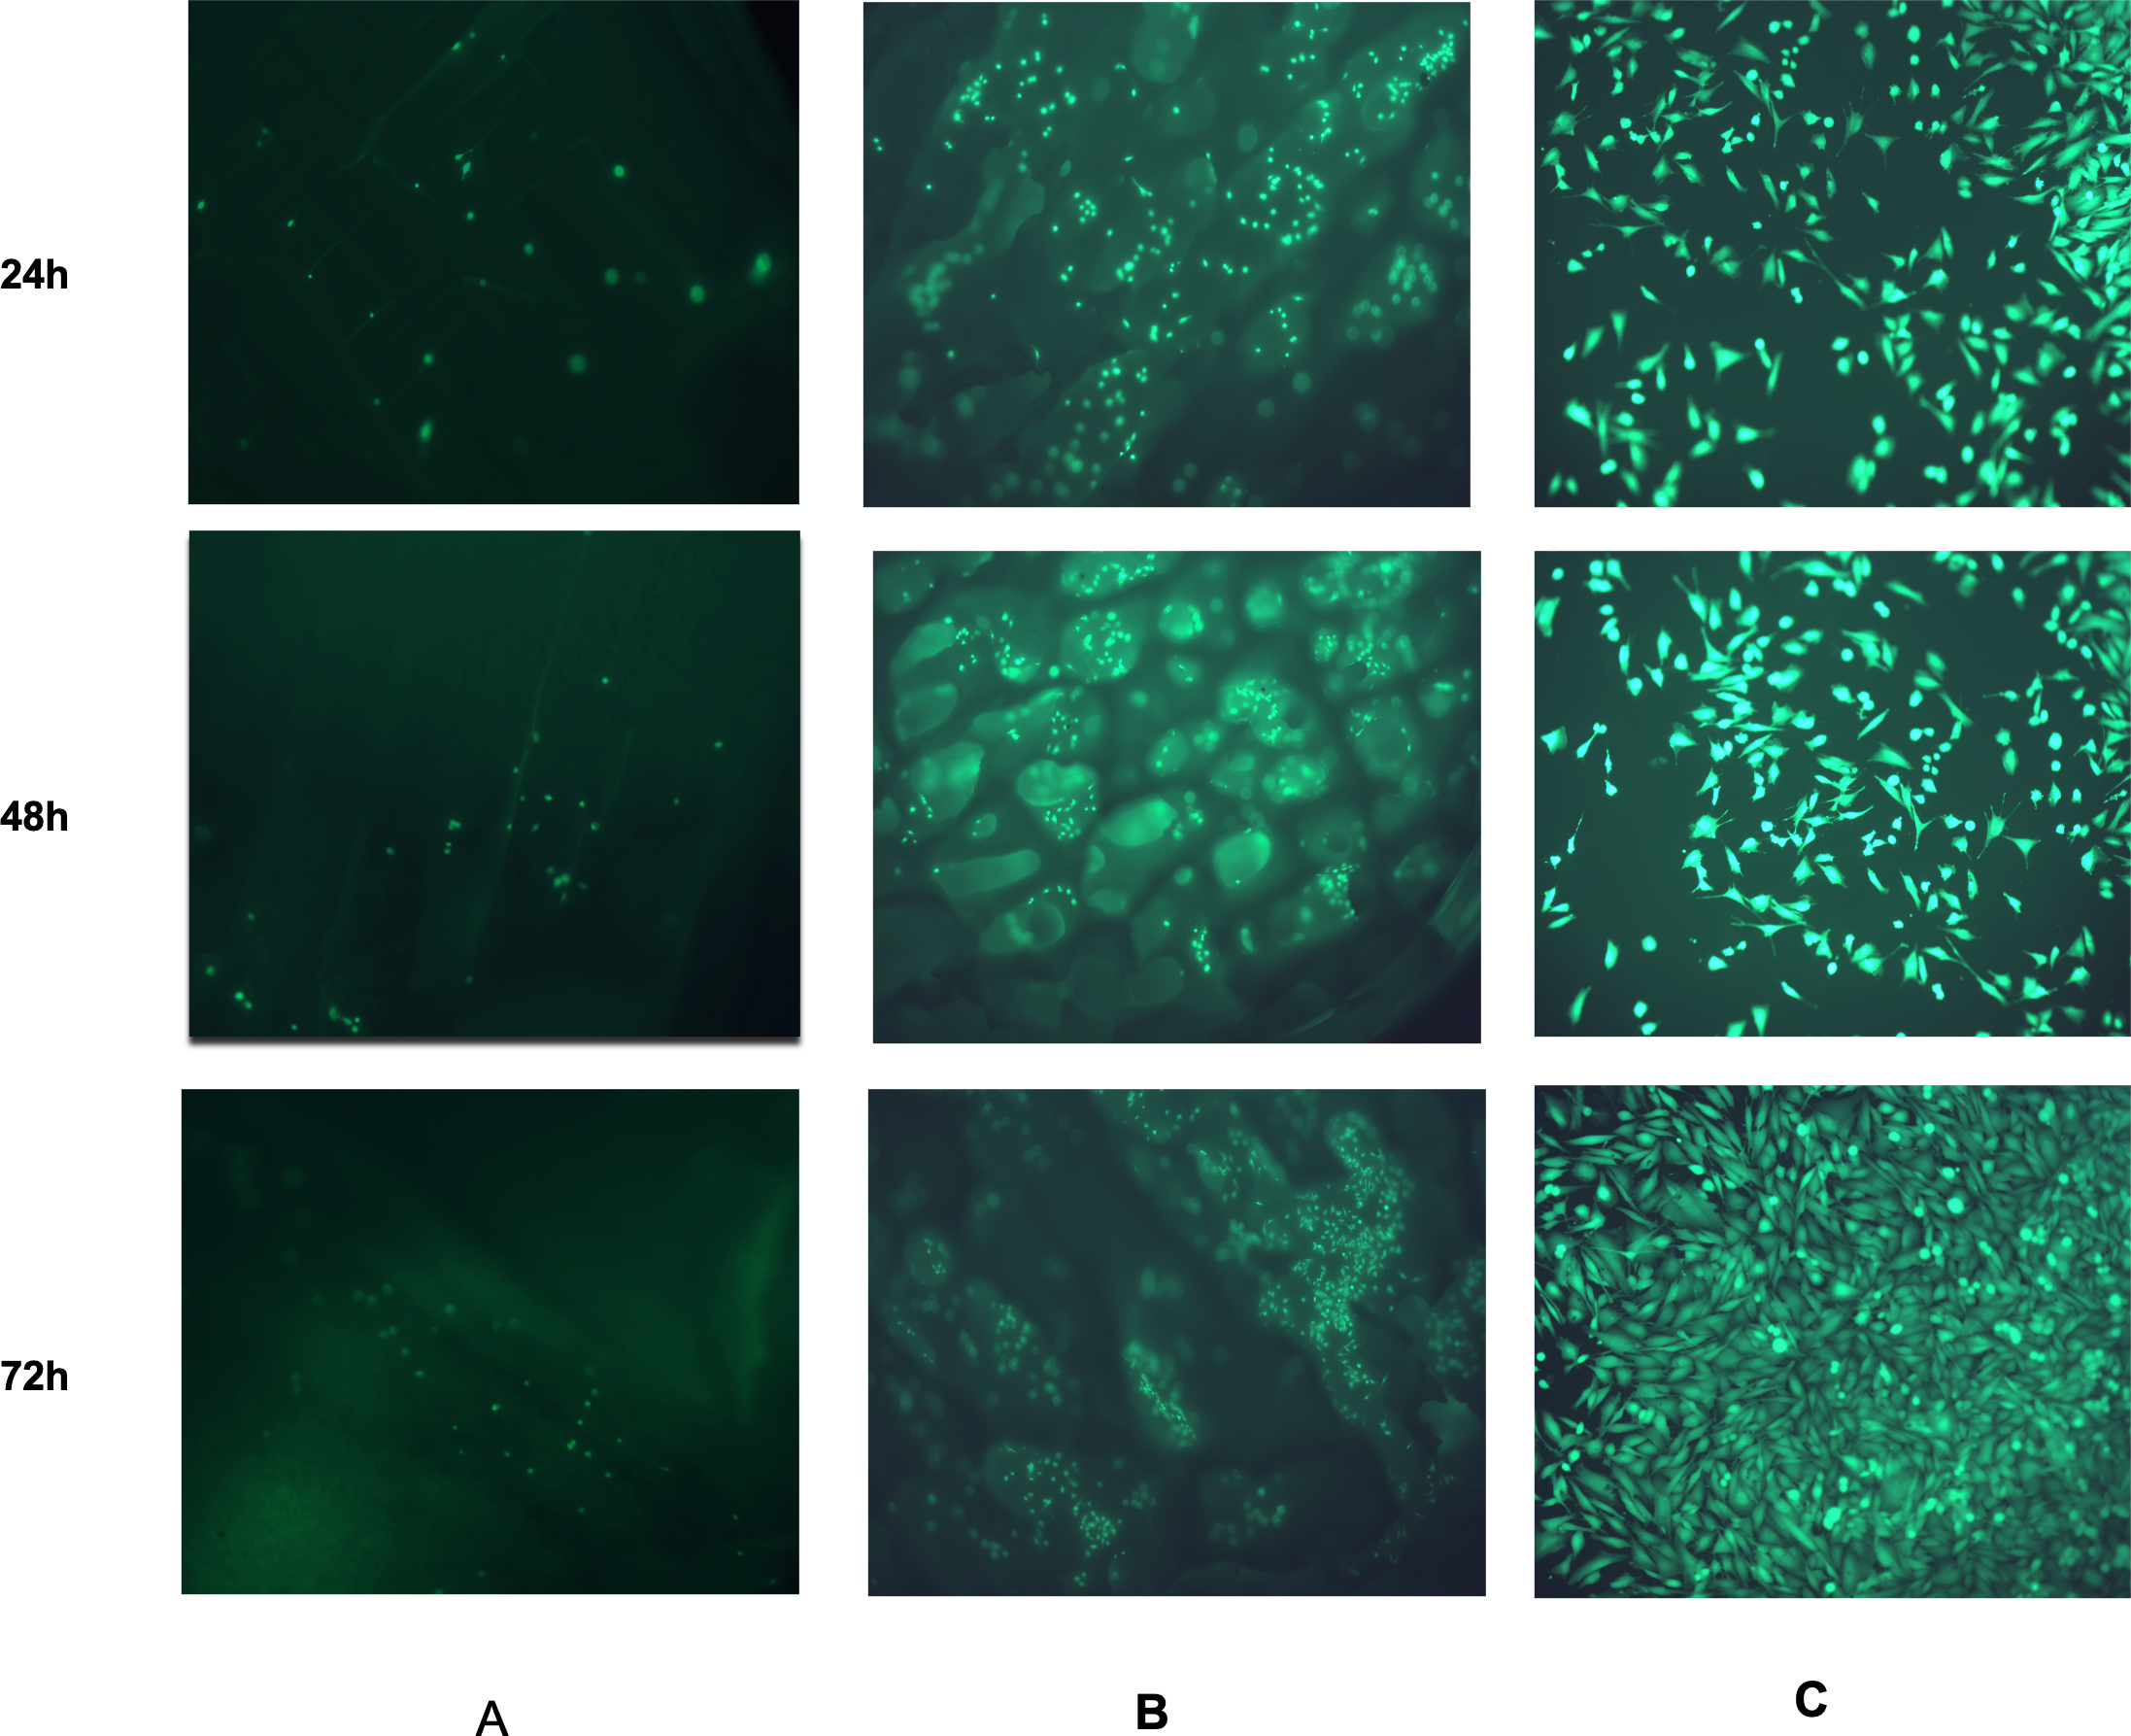 In vitro biocompatibility of PUR=LV scaffolds. Calcein staining of